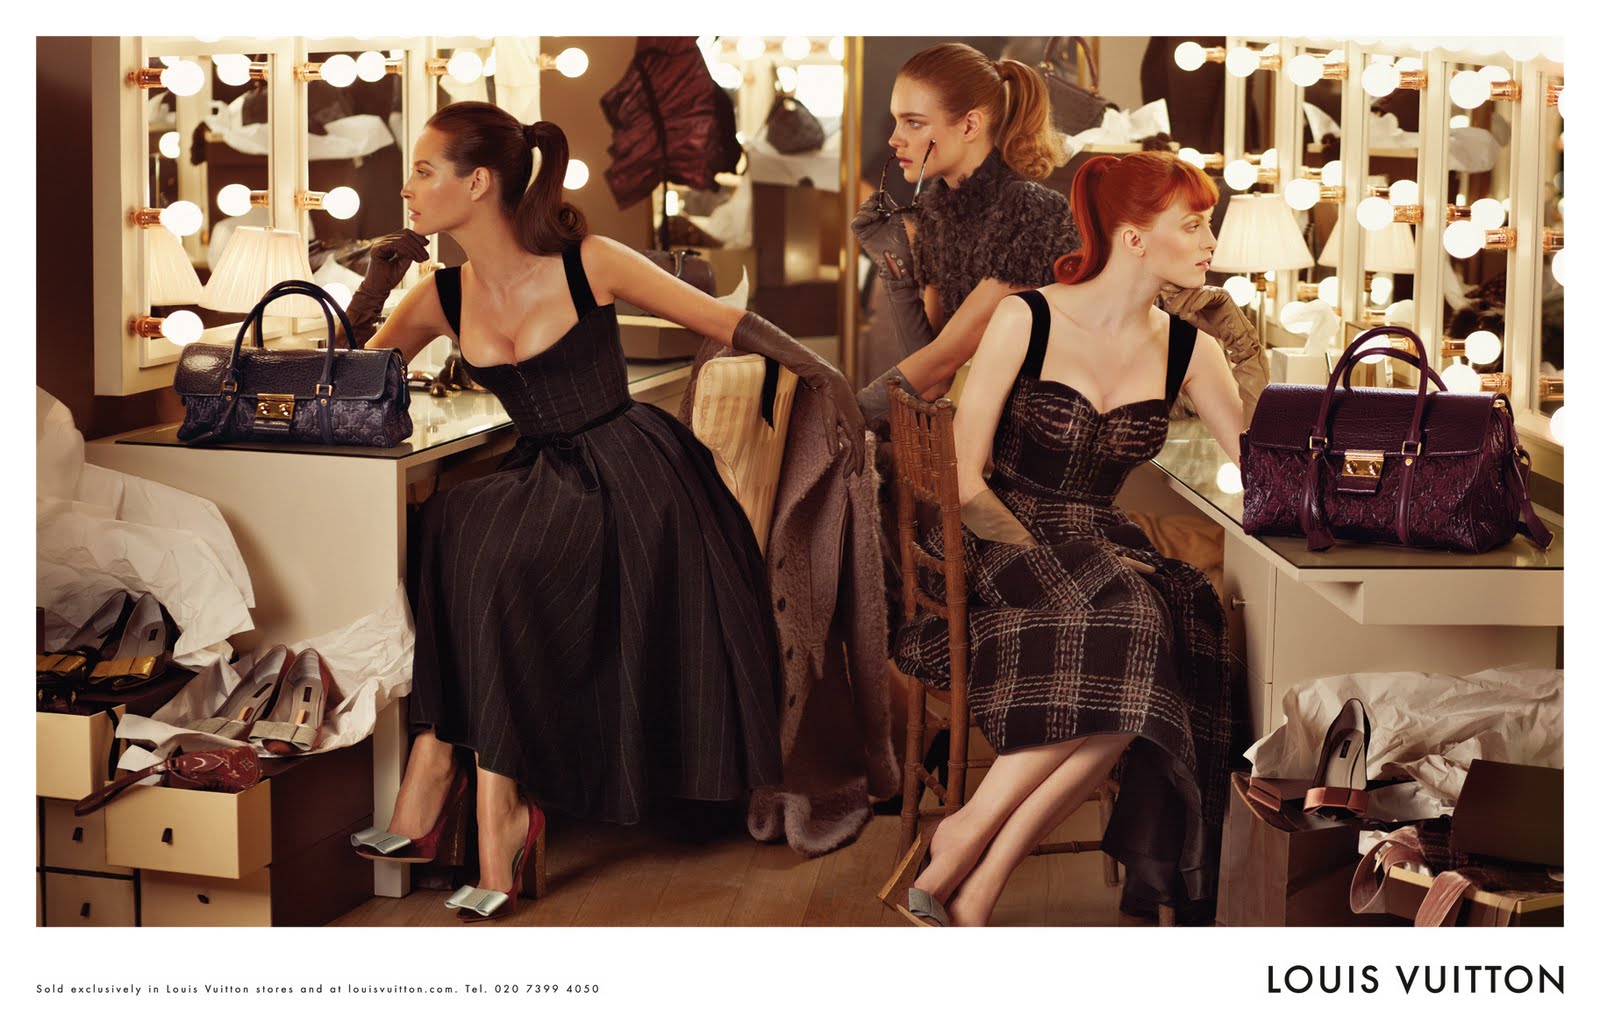 Fusion Of Effects: Ray of Inspirology: Louis Vuitton F/W 2010 Promotion  Campaign